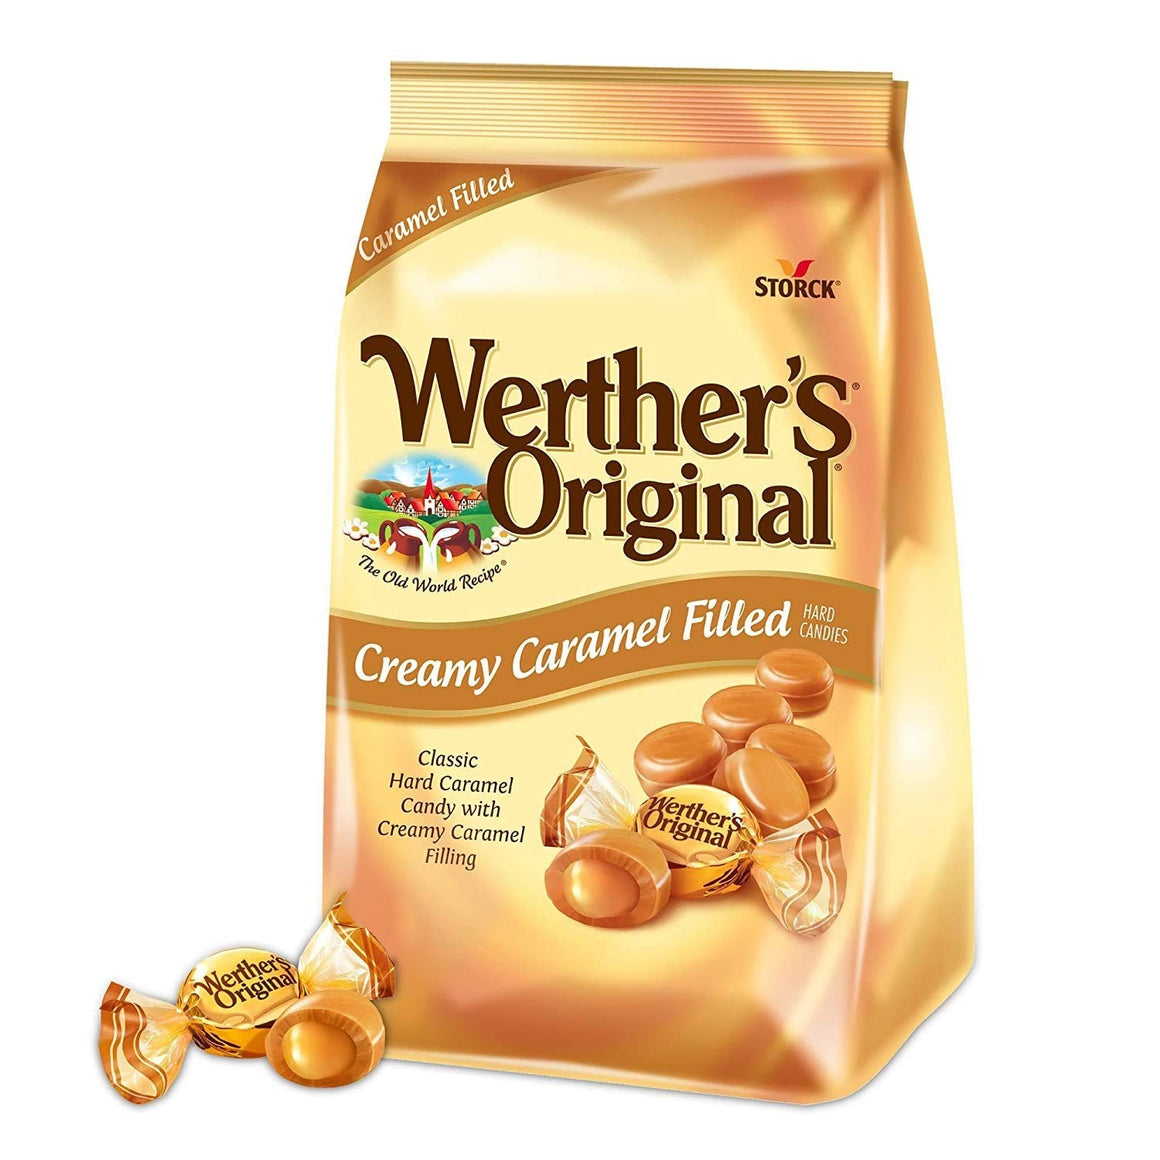 All City Candy Werther's Original Creamy Caramel Filled Hard Candies 27 oz. Bag Hard Storck For fresh candy and great service, visit www.allcitycandy.com